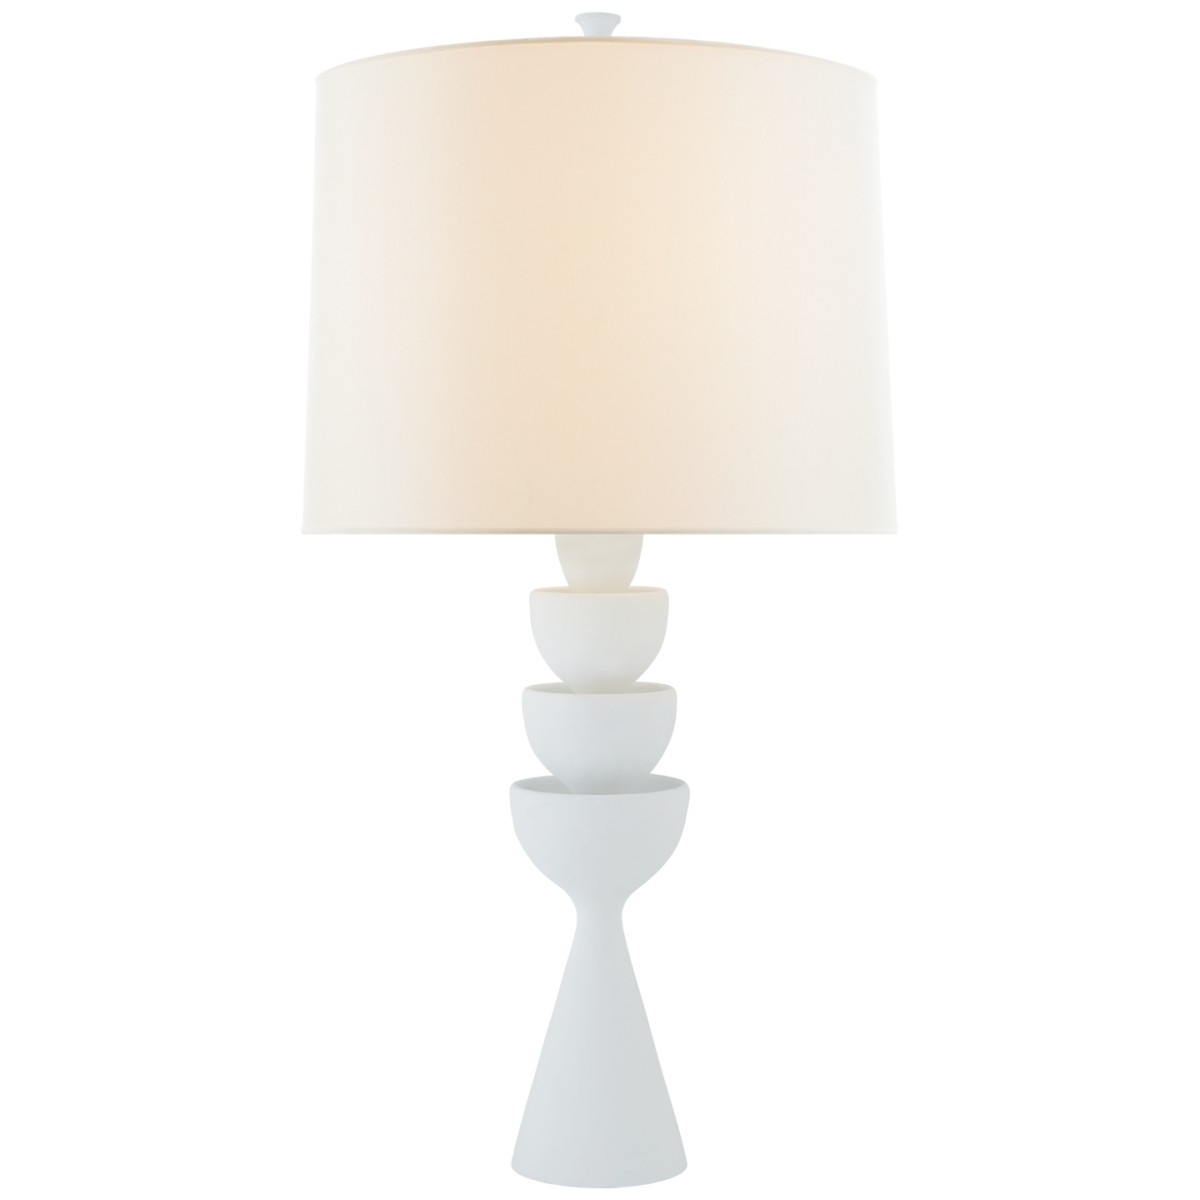 Veranna Large Table Lamp with Linen Shade | Highlight image